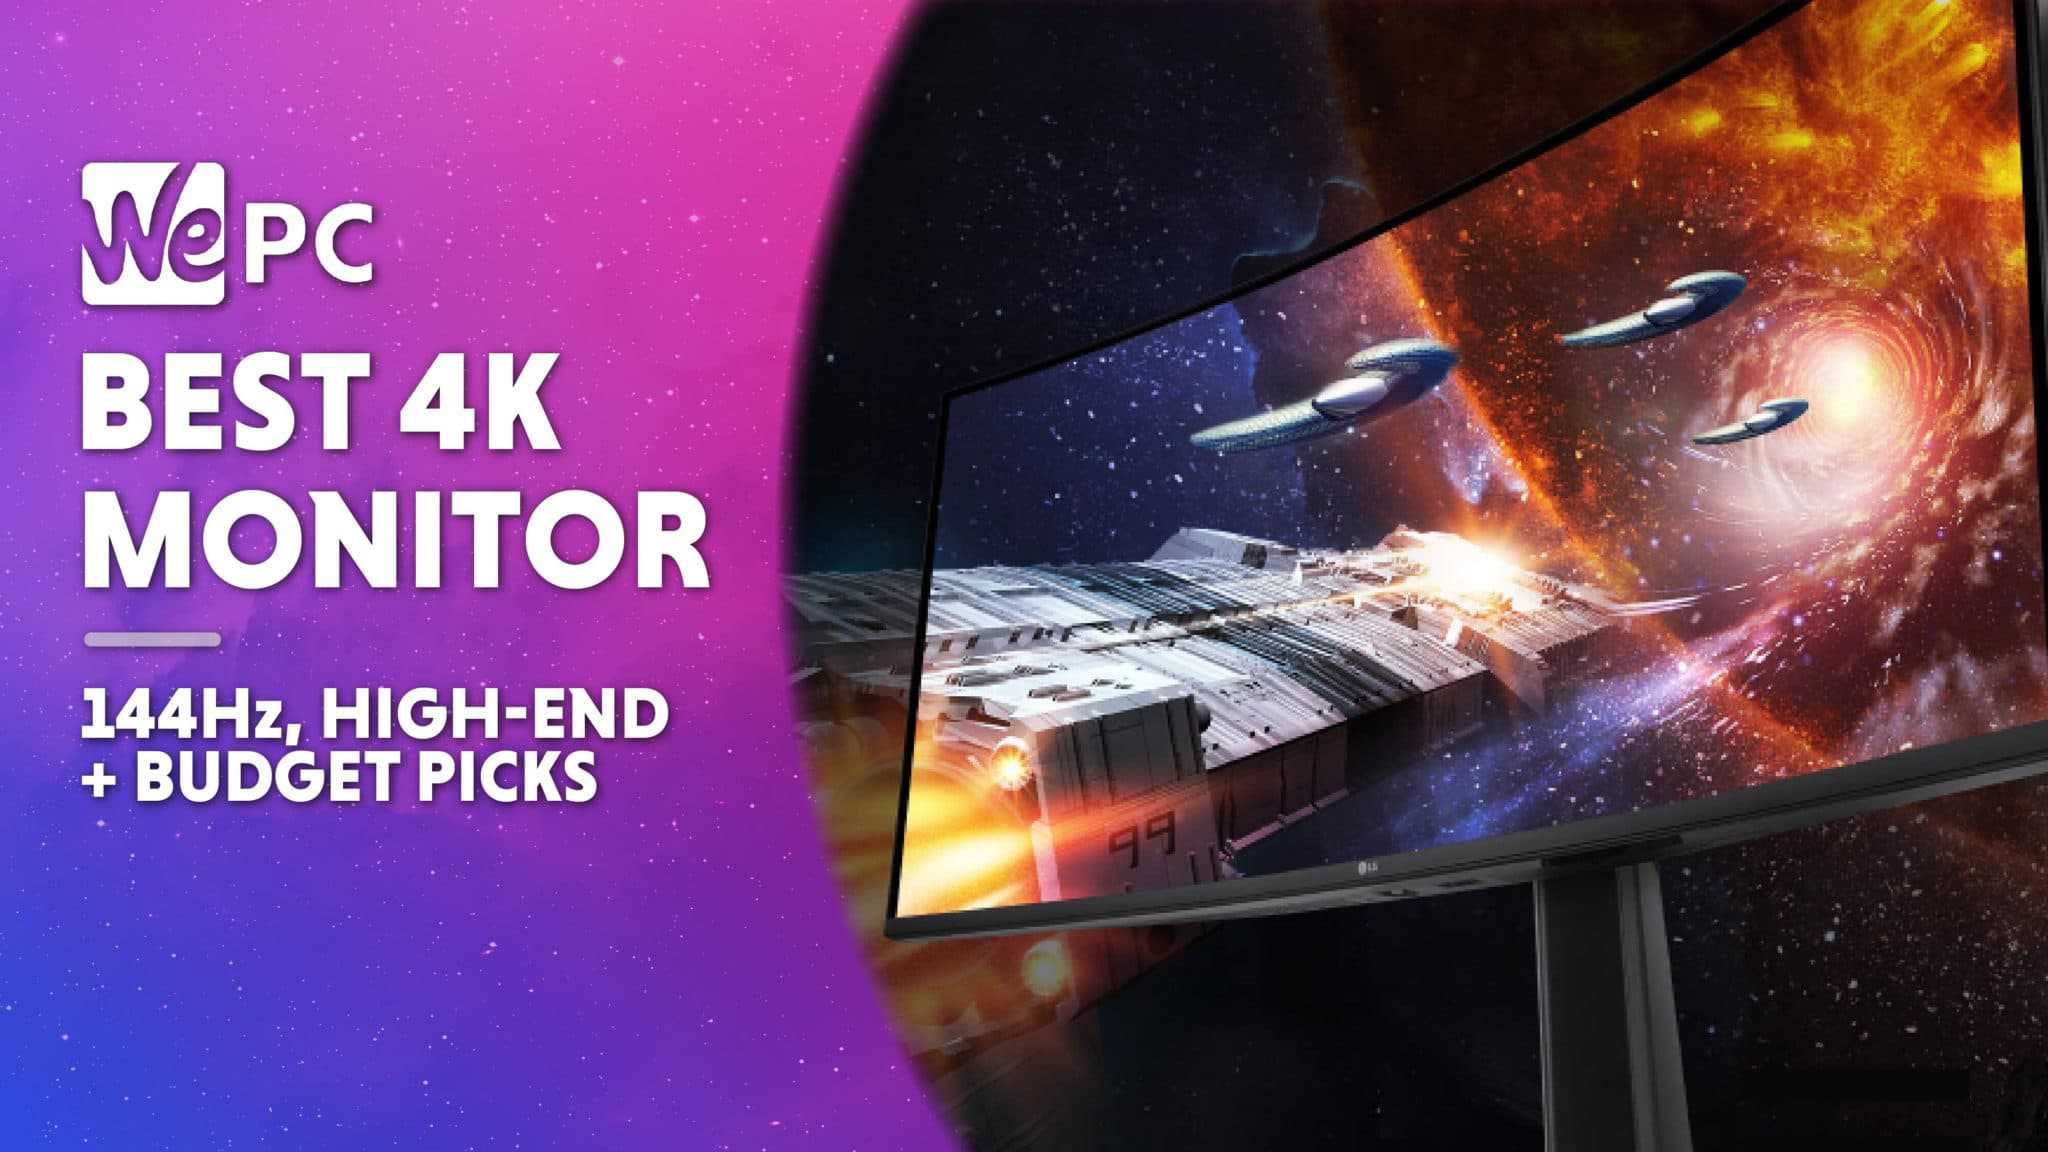 WePC best 4k monitor featured image 01